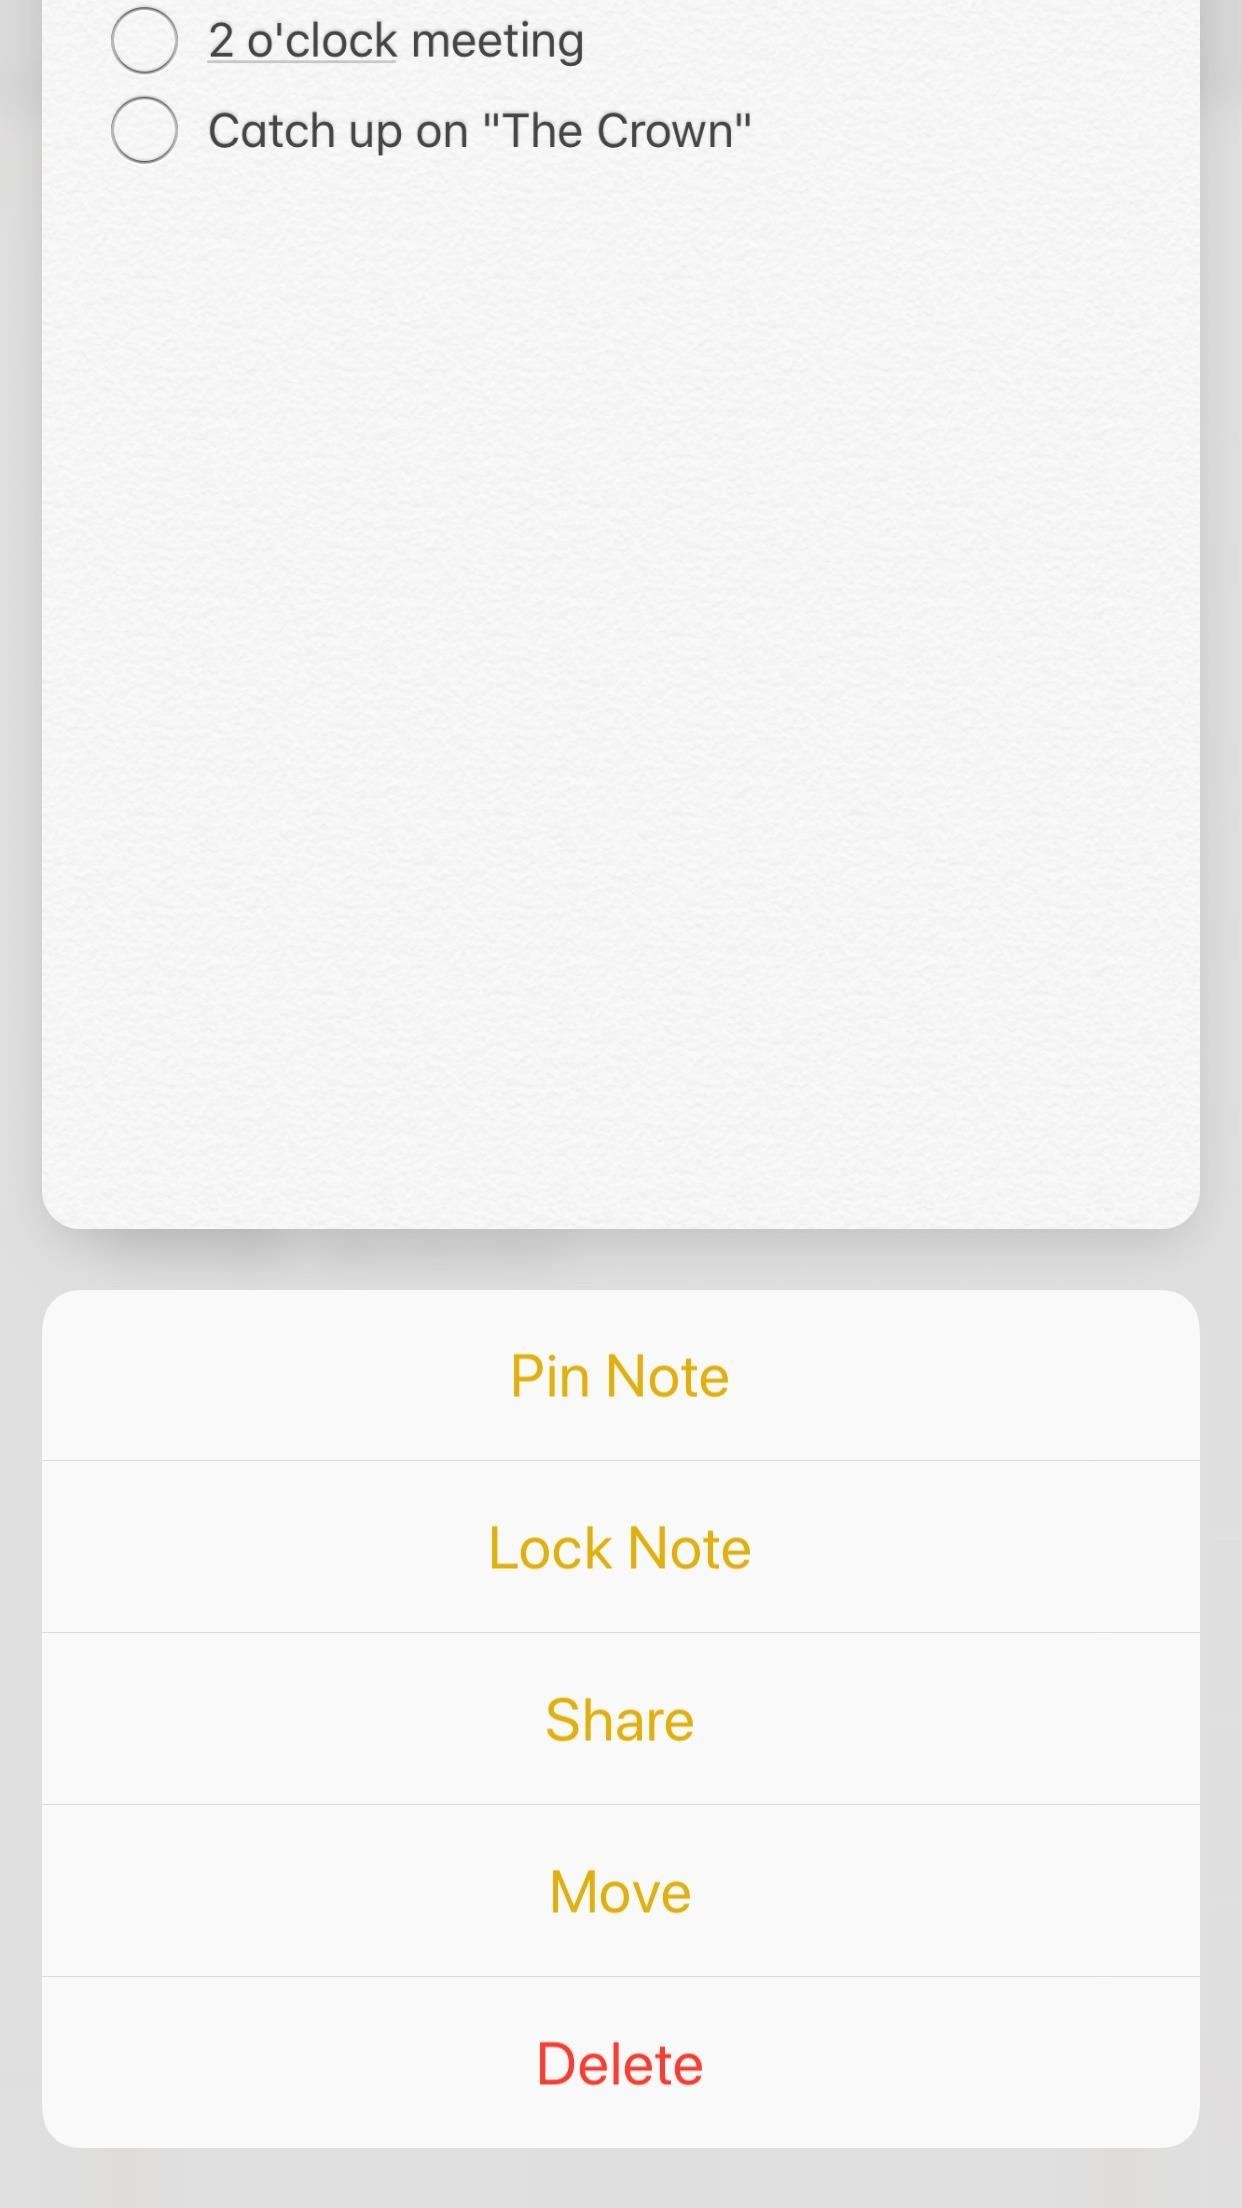 Notes 101: How to Pin Important Notes to the Top of Folders